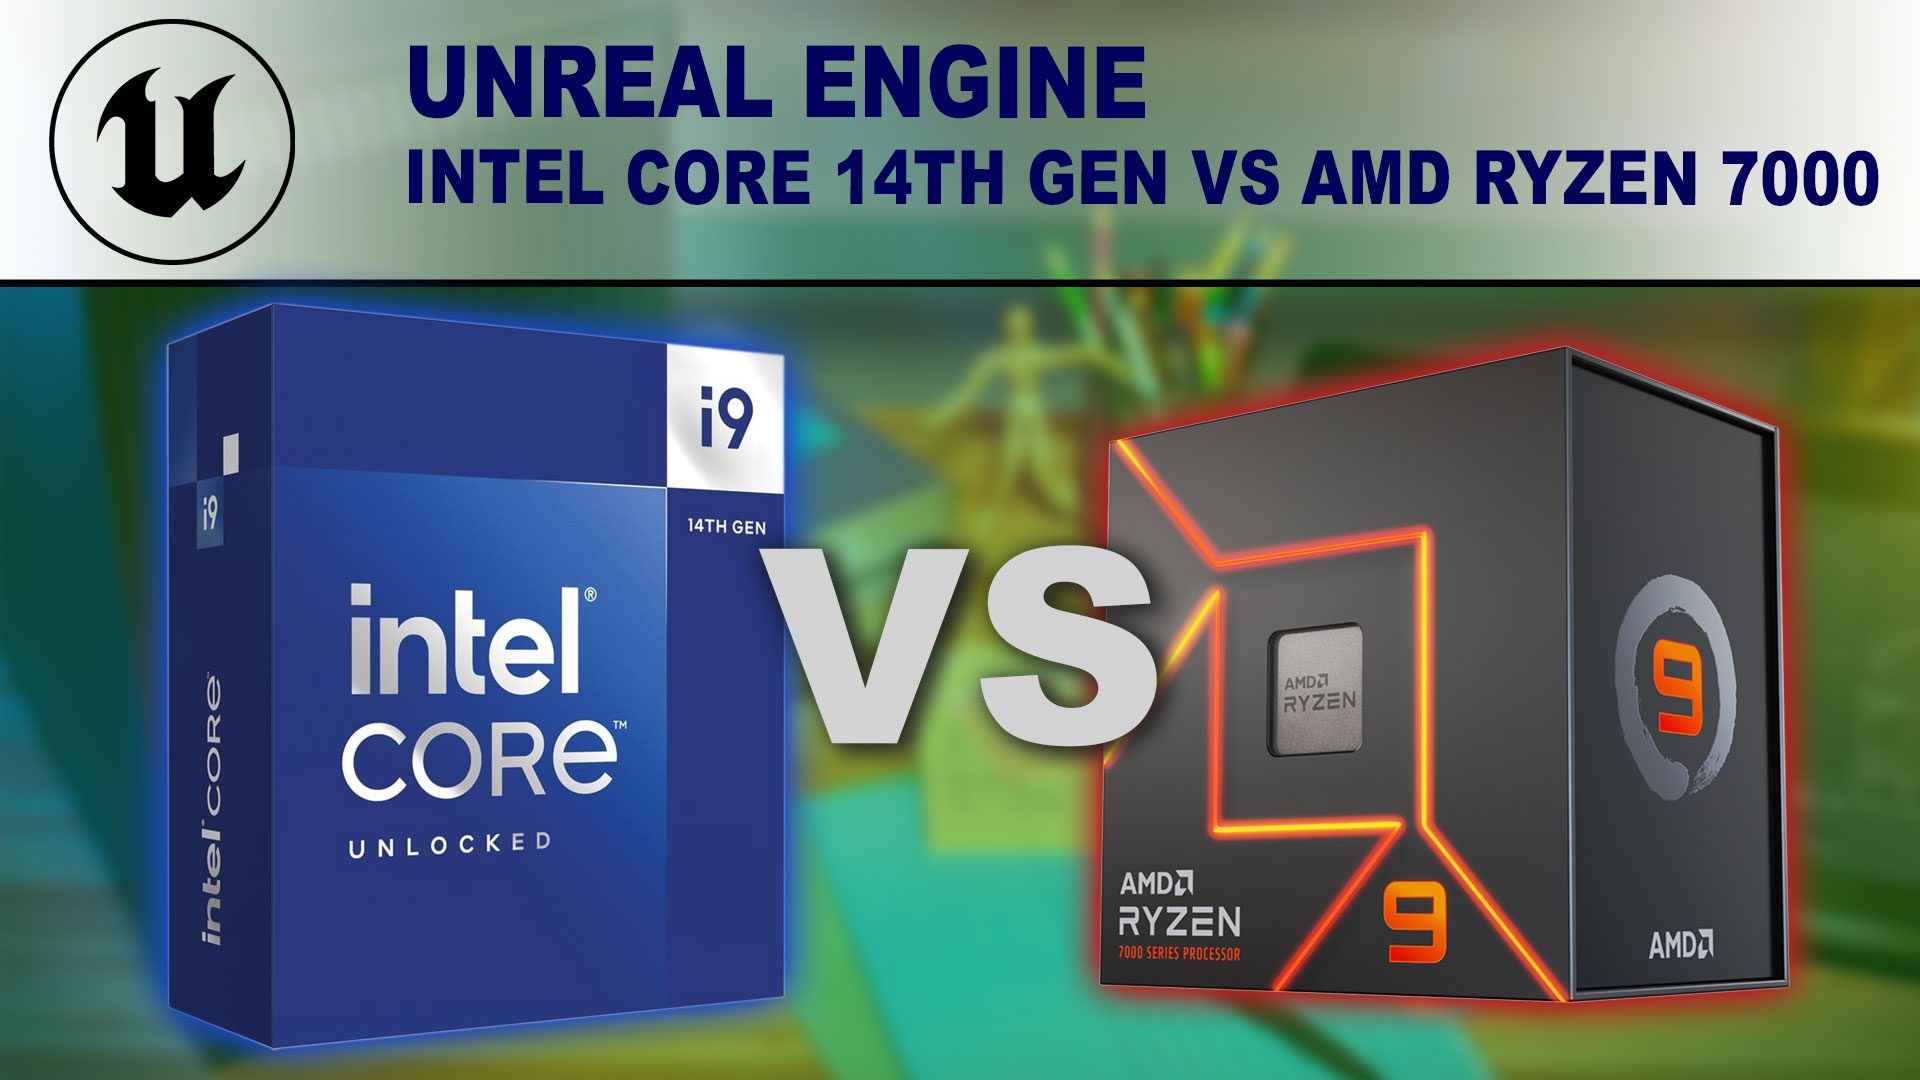 Decorative Image: Intel Core i9-14900K box and AMD Ryzen 9 7950X box on a green background with the words "VS" between them and the title "Unreal Engine" above them.